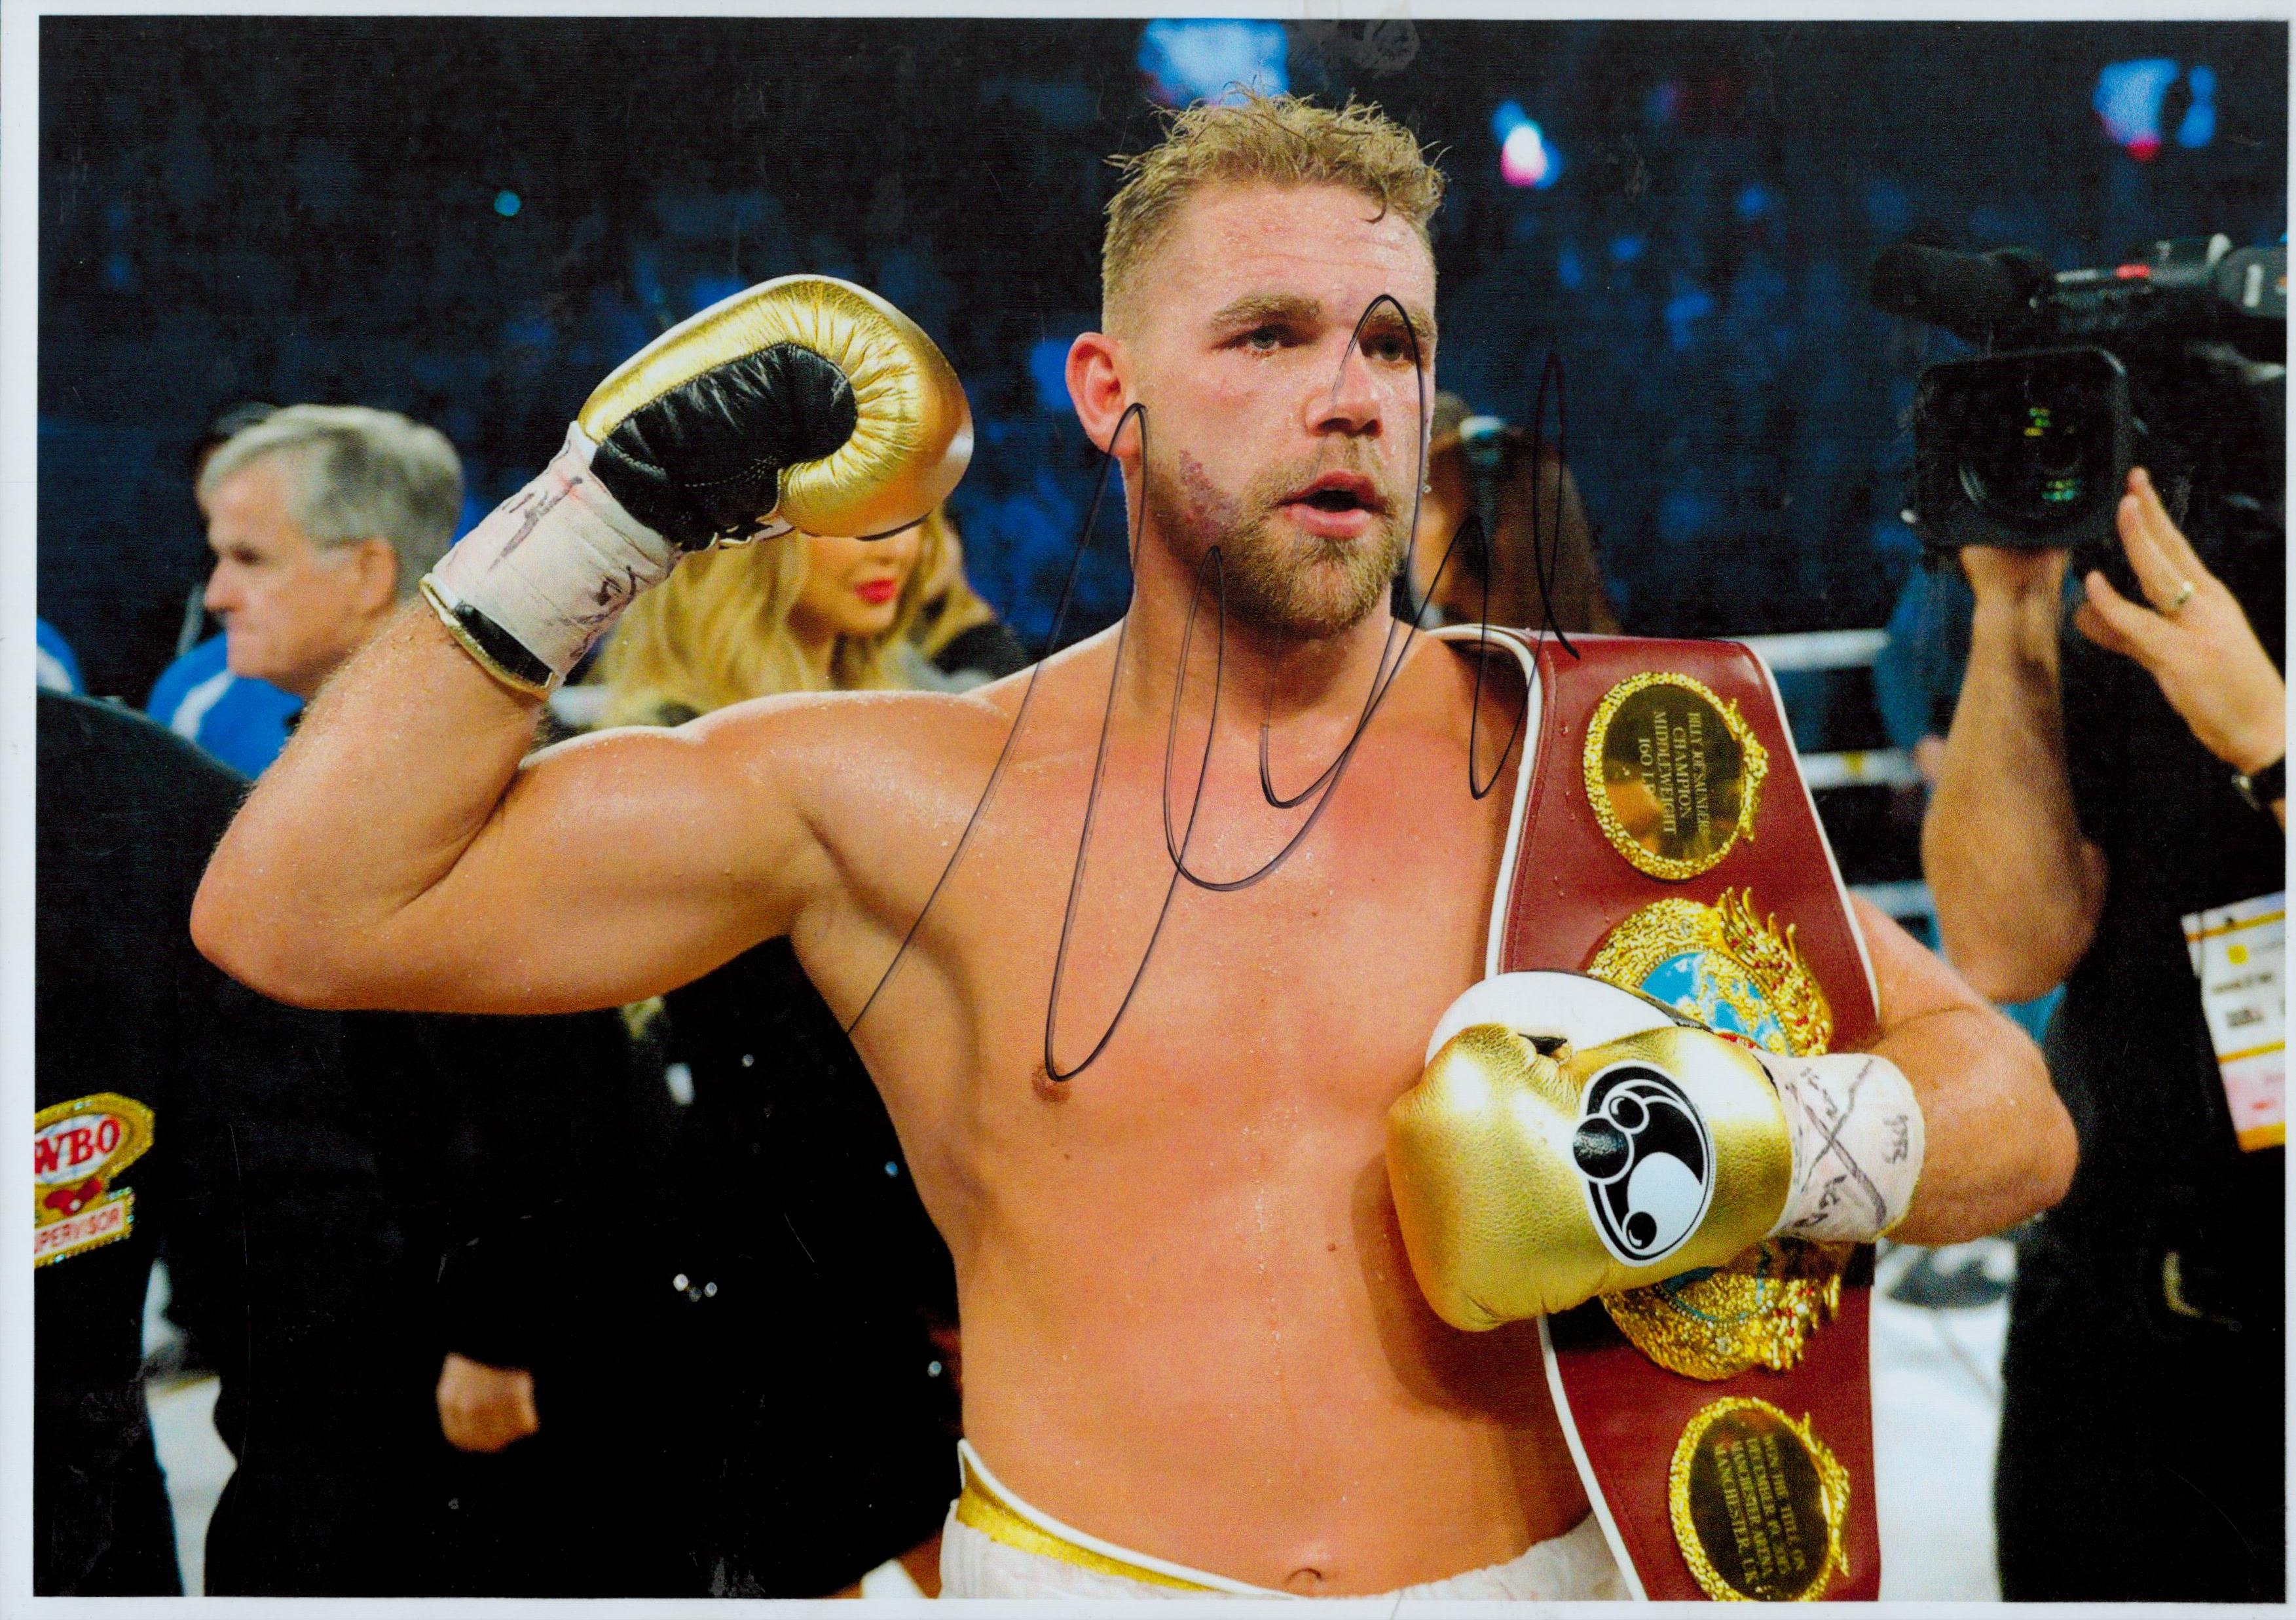 Boxing Billy Joe Saunders signed 12x8 colour photo. Good condition. All autographed items come